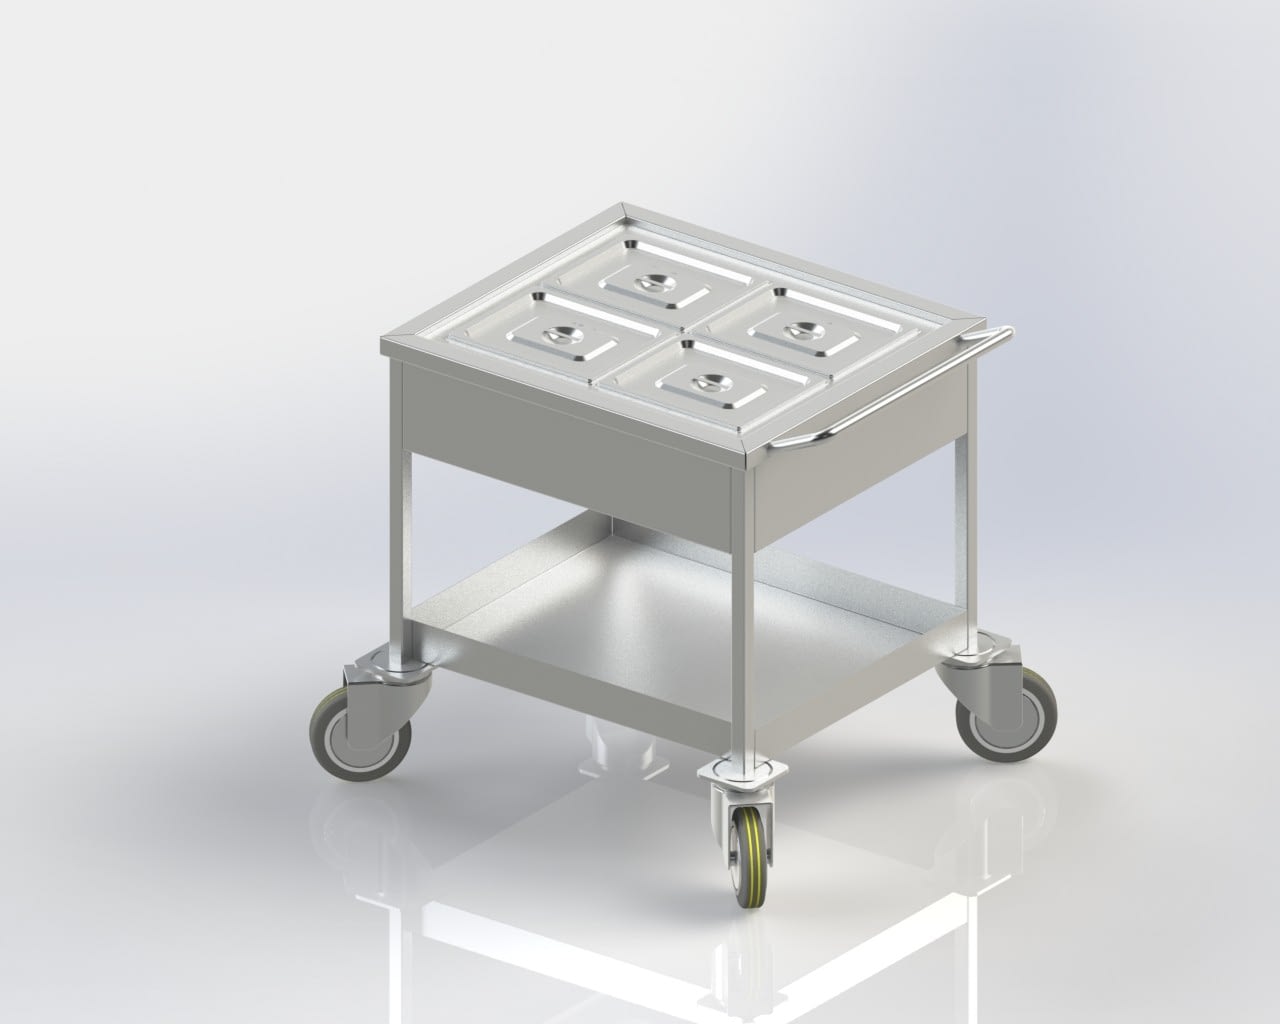 Food Service Trolley keeps food warm while serving.